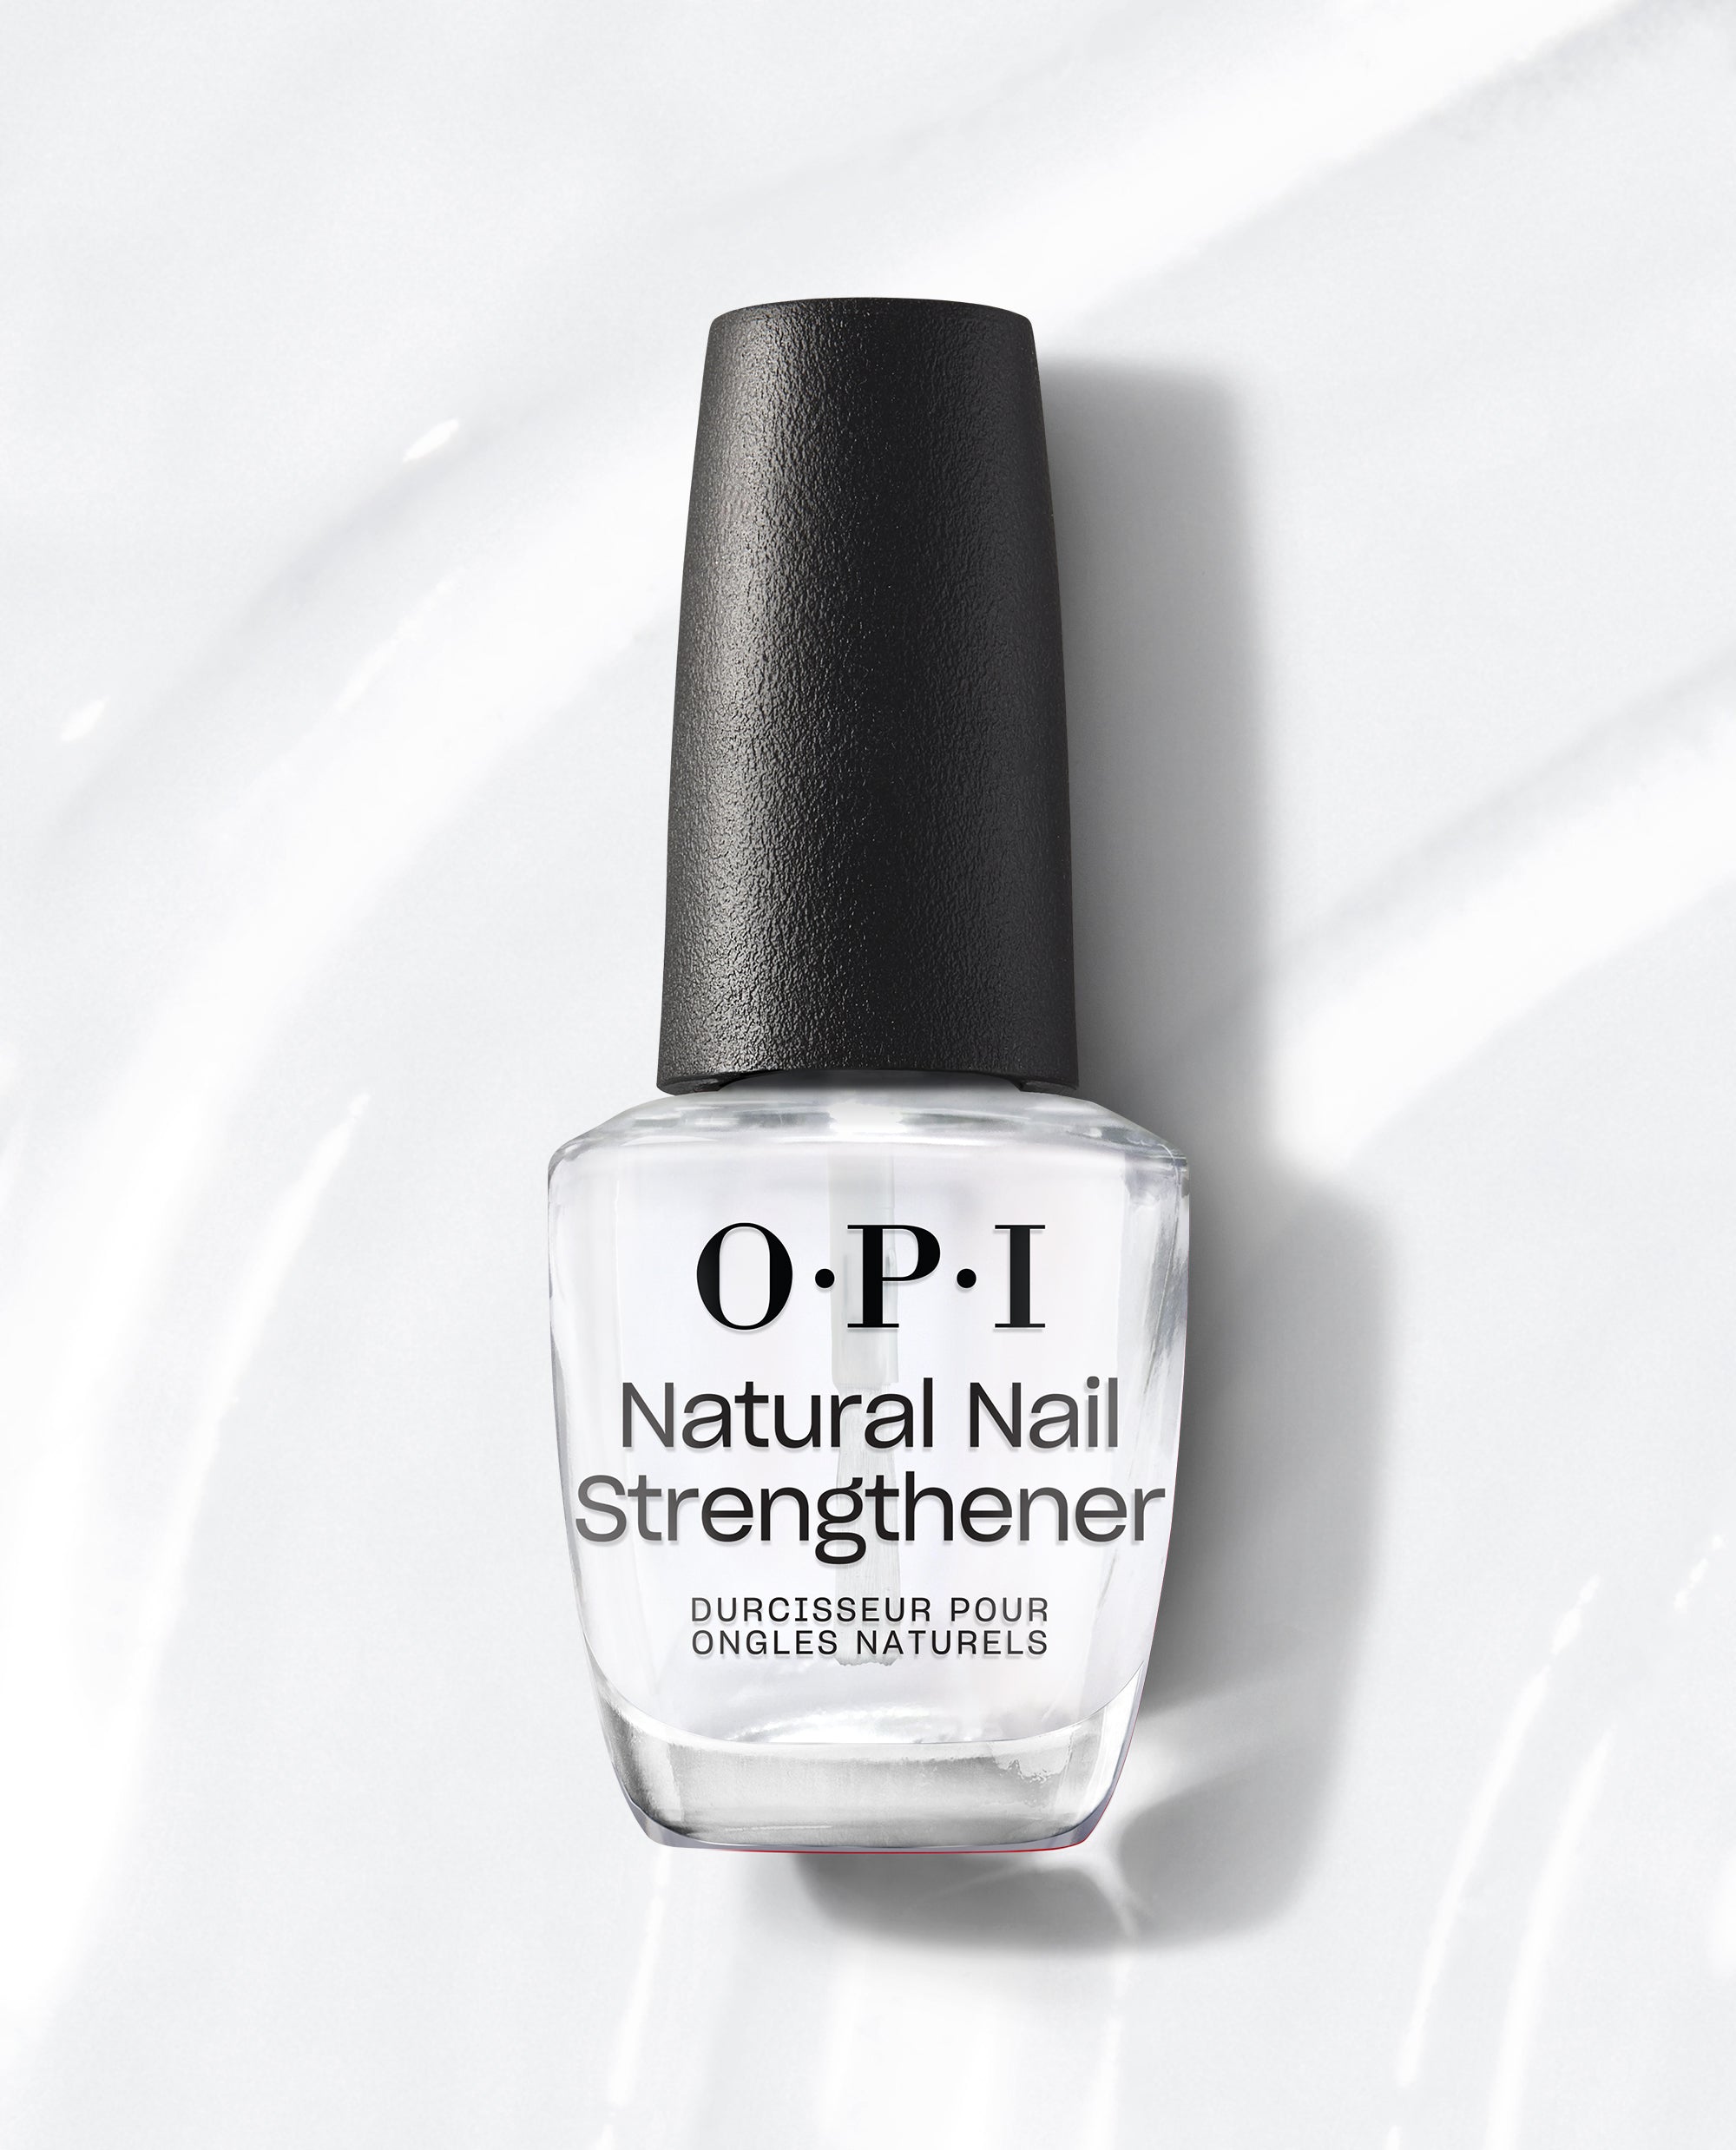 OPI Natural Nail Strengthener Treatments & Strengtheners Nail Essentials